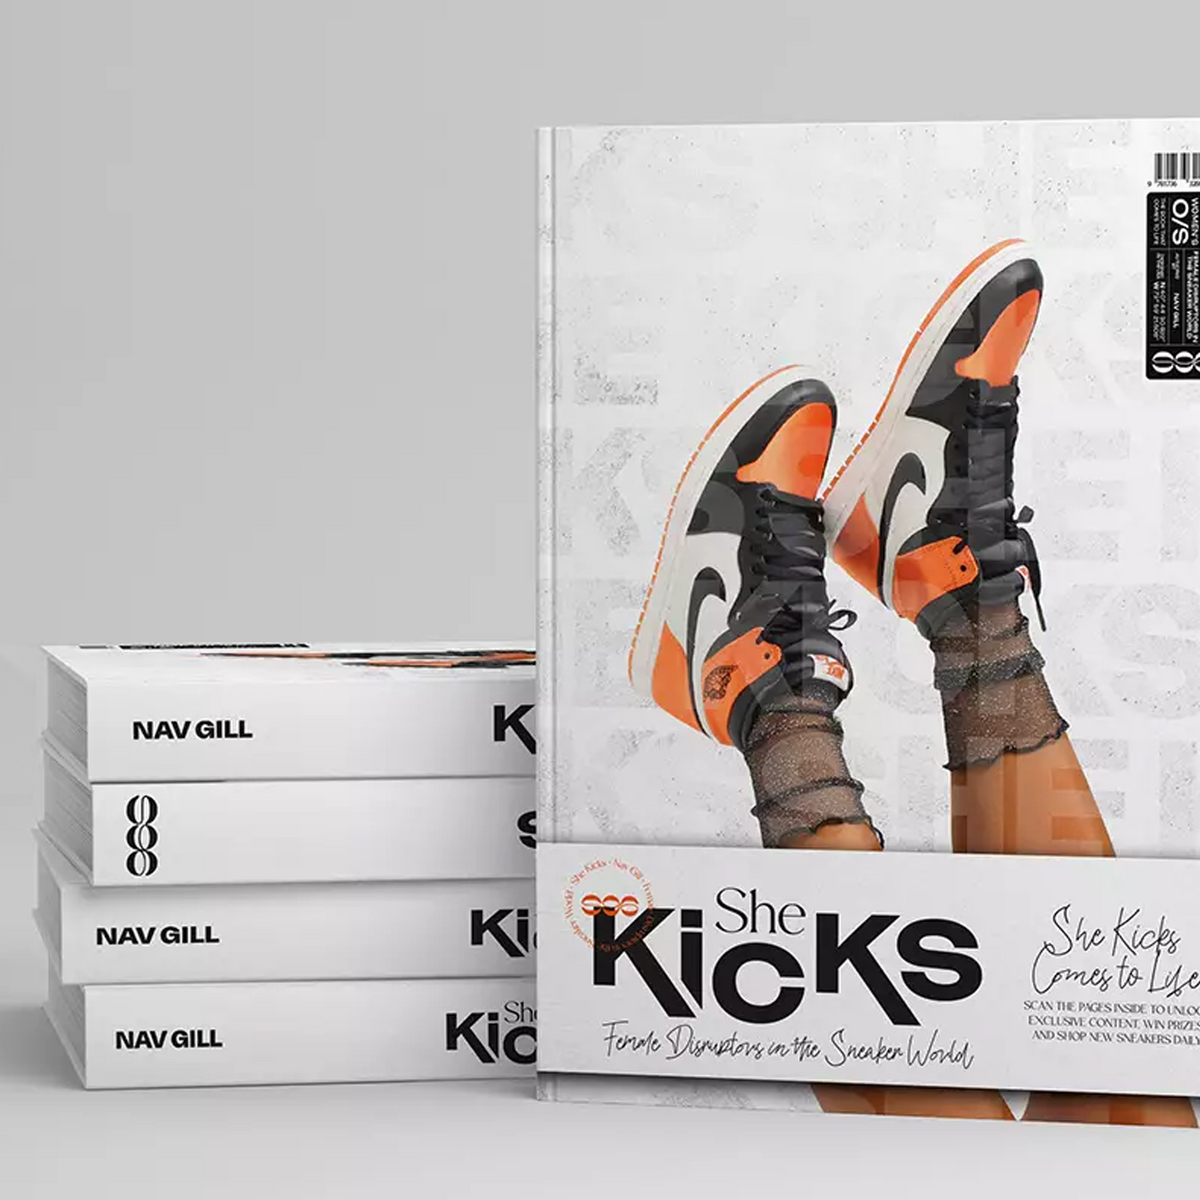 'She Kicks' Continues To Champion Women In Sneakers